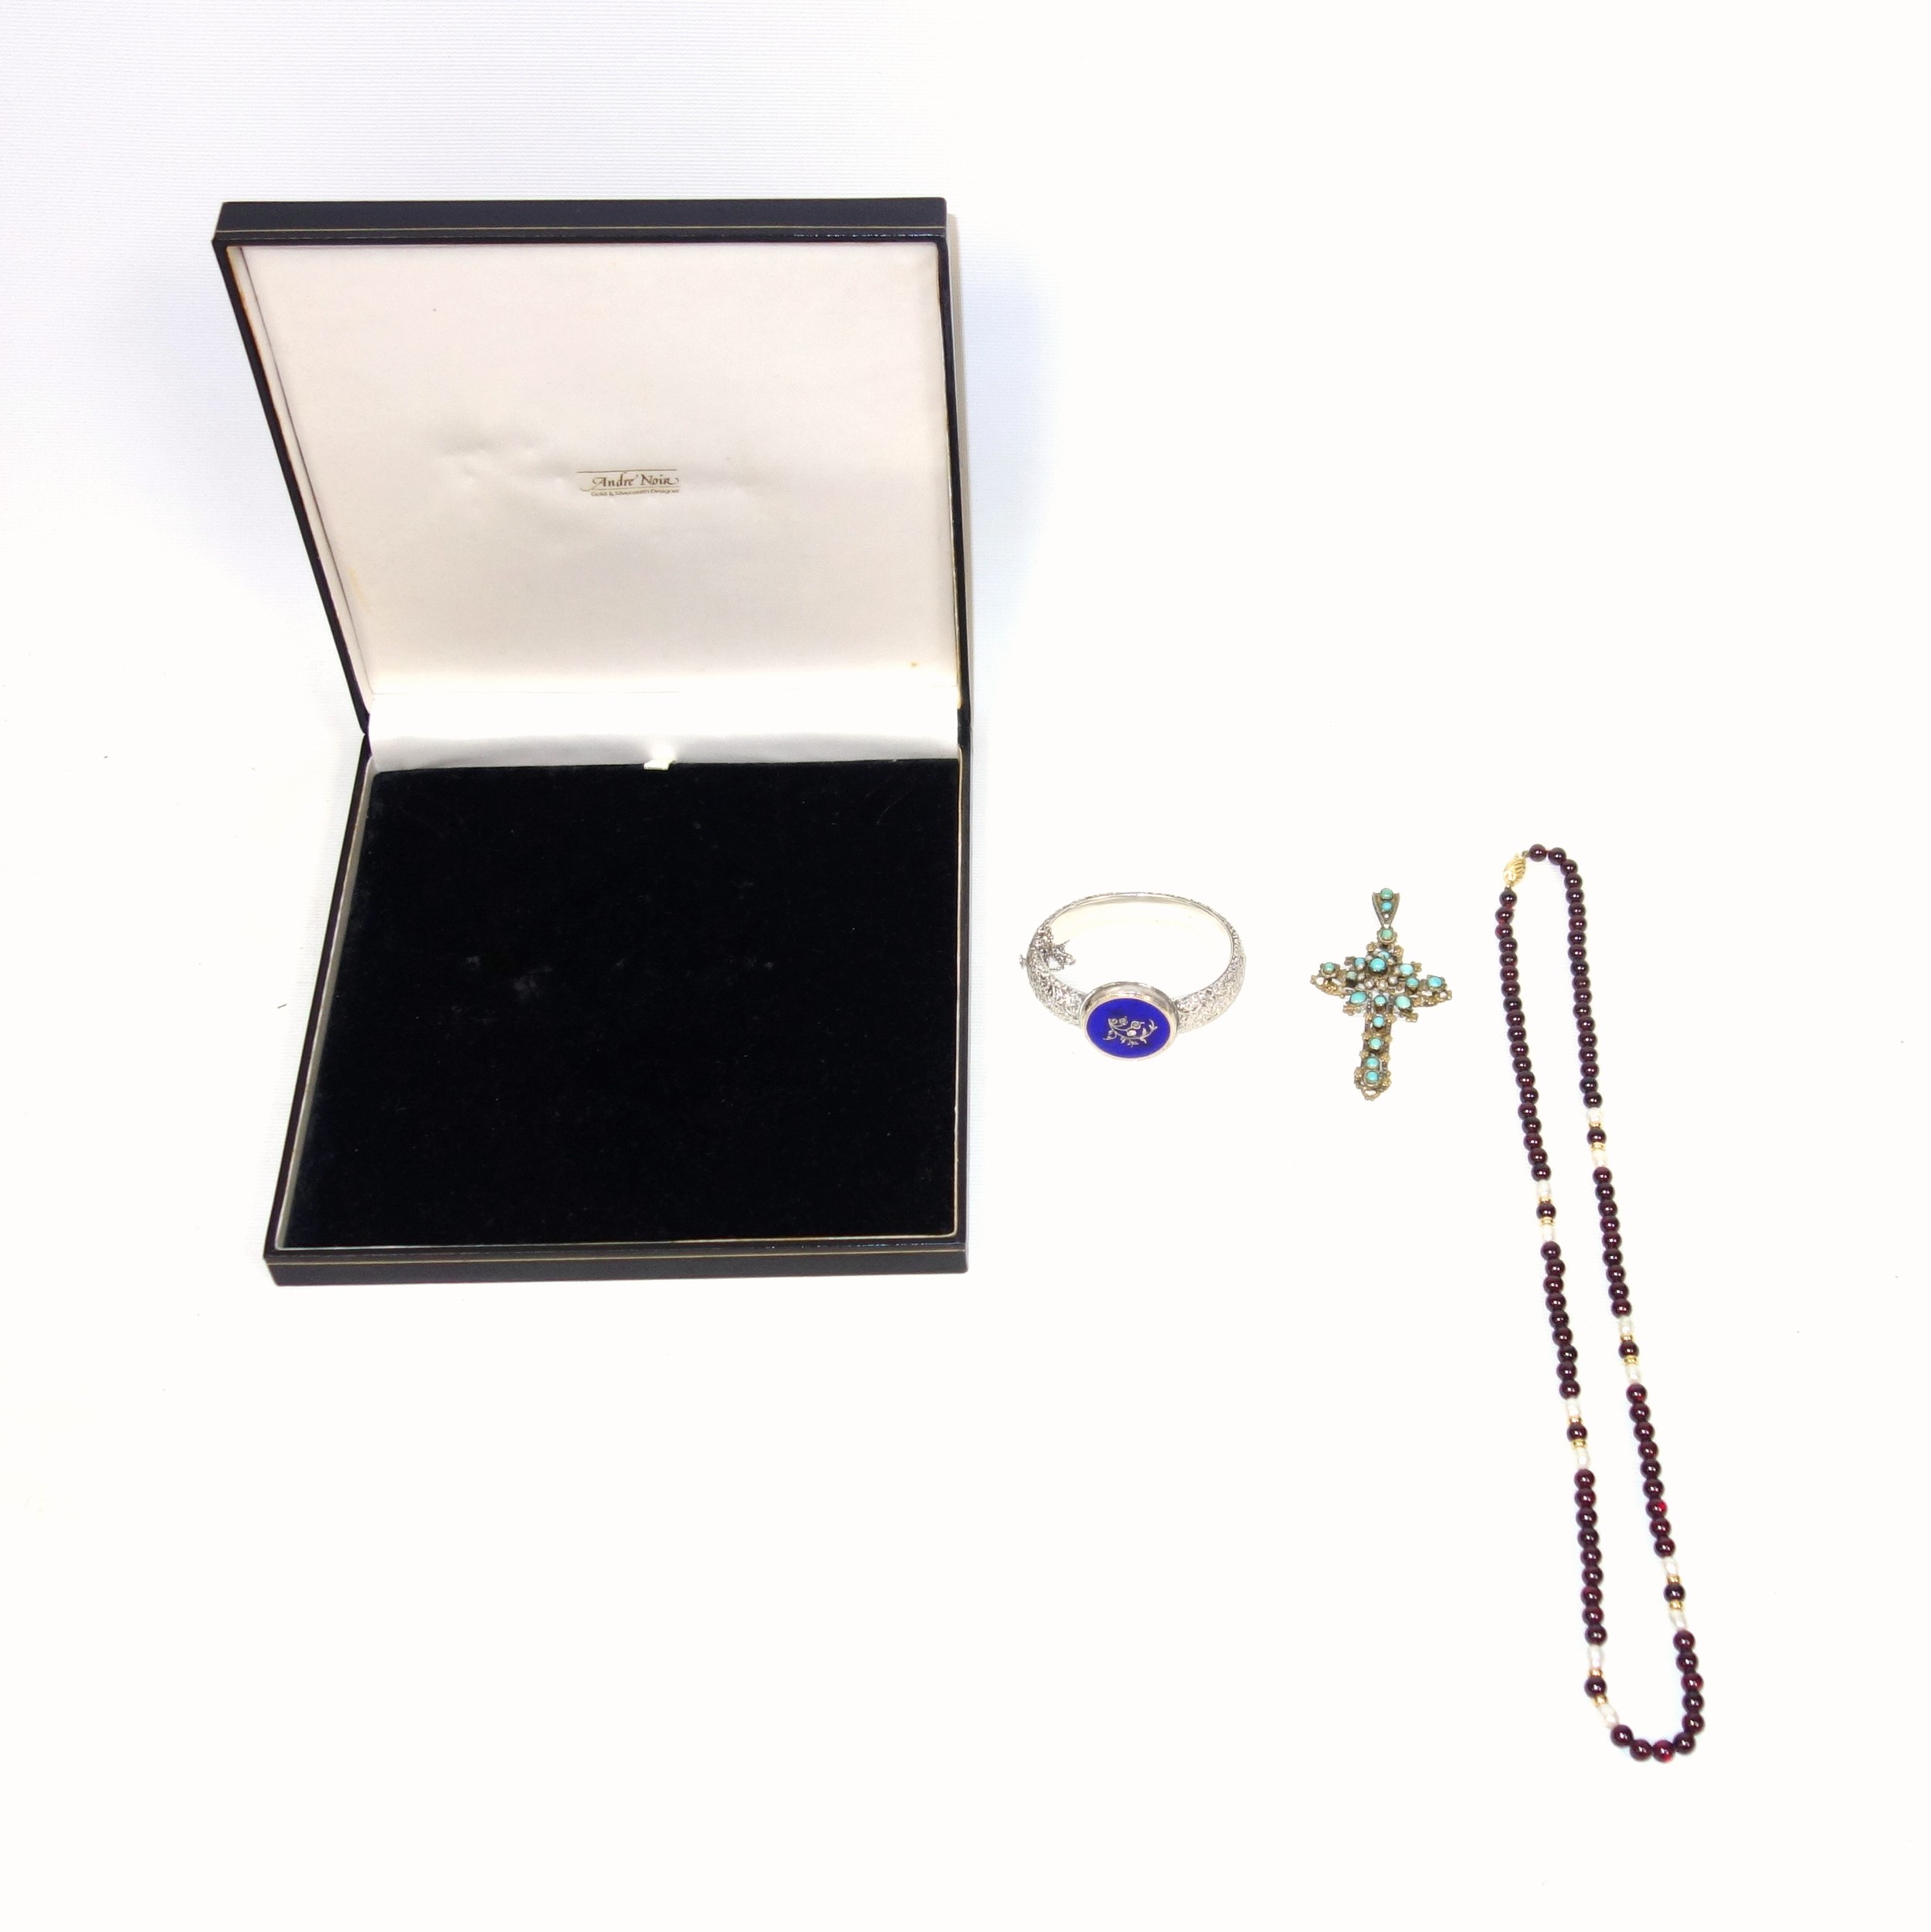 Purple and mother-of-pearl bead necklace with a clasp stamped "750", L.61cm, cased; Eastern